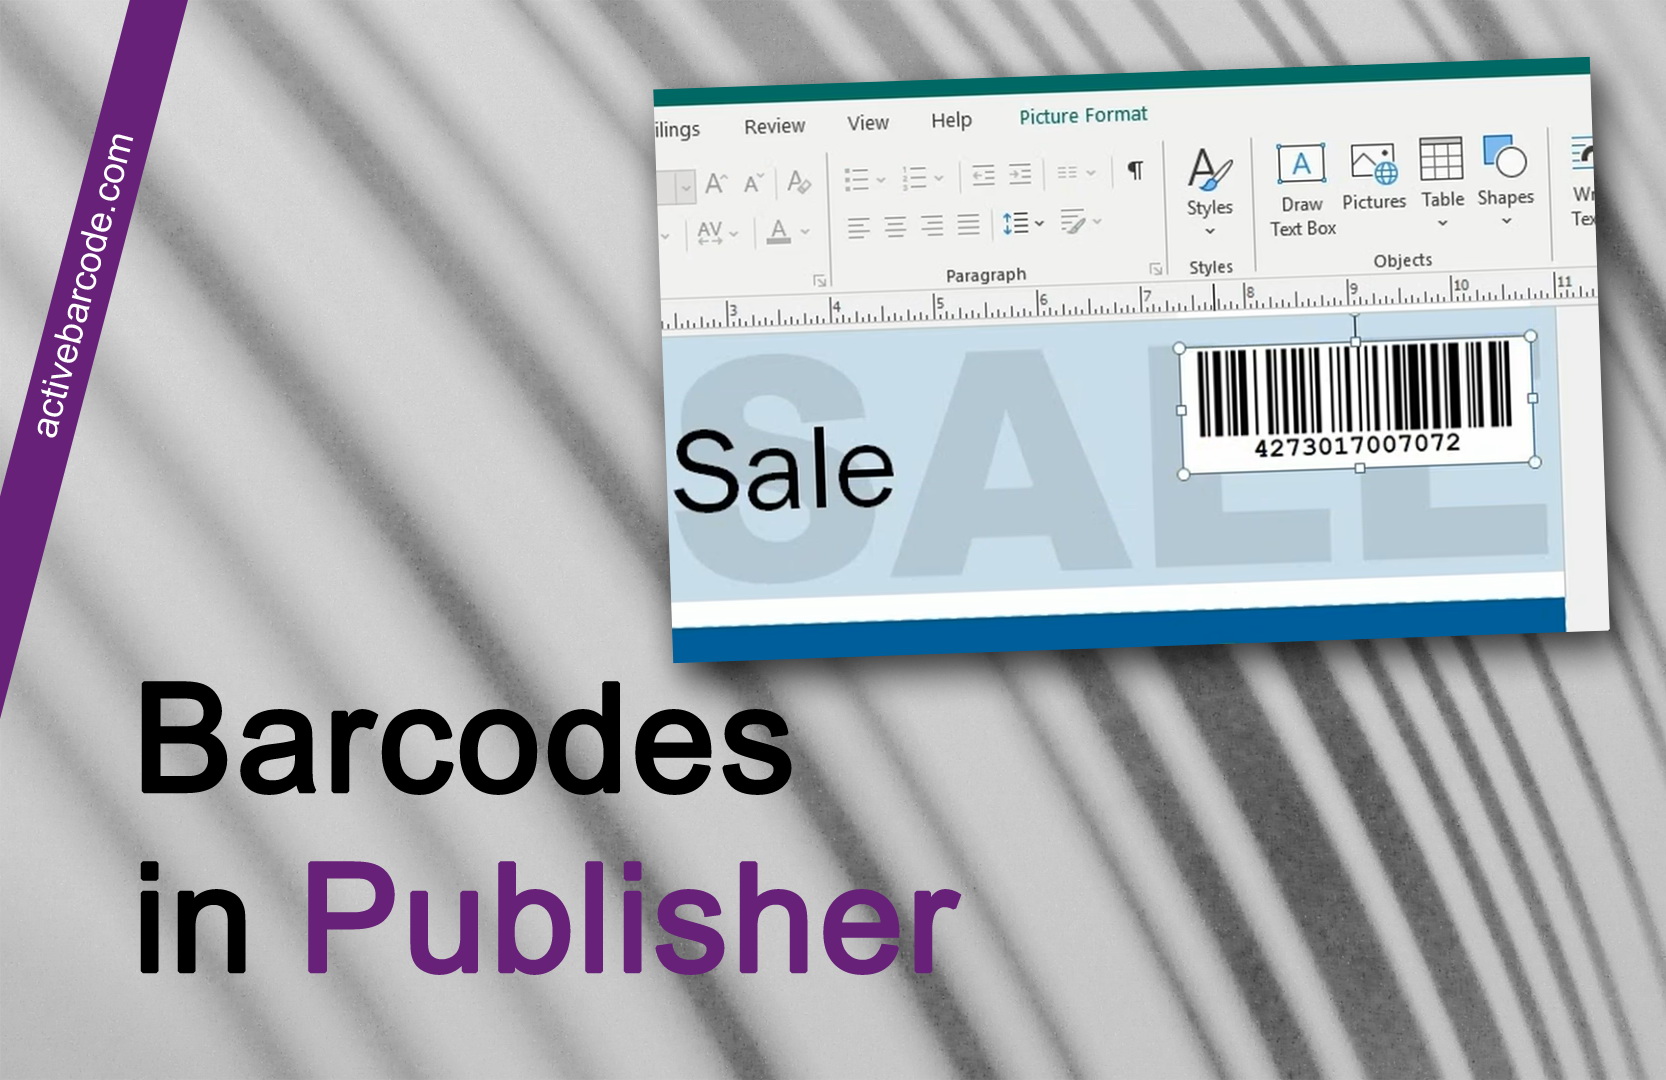 ActiveBarcode: How to add a barcode via the clipboard to any document